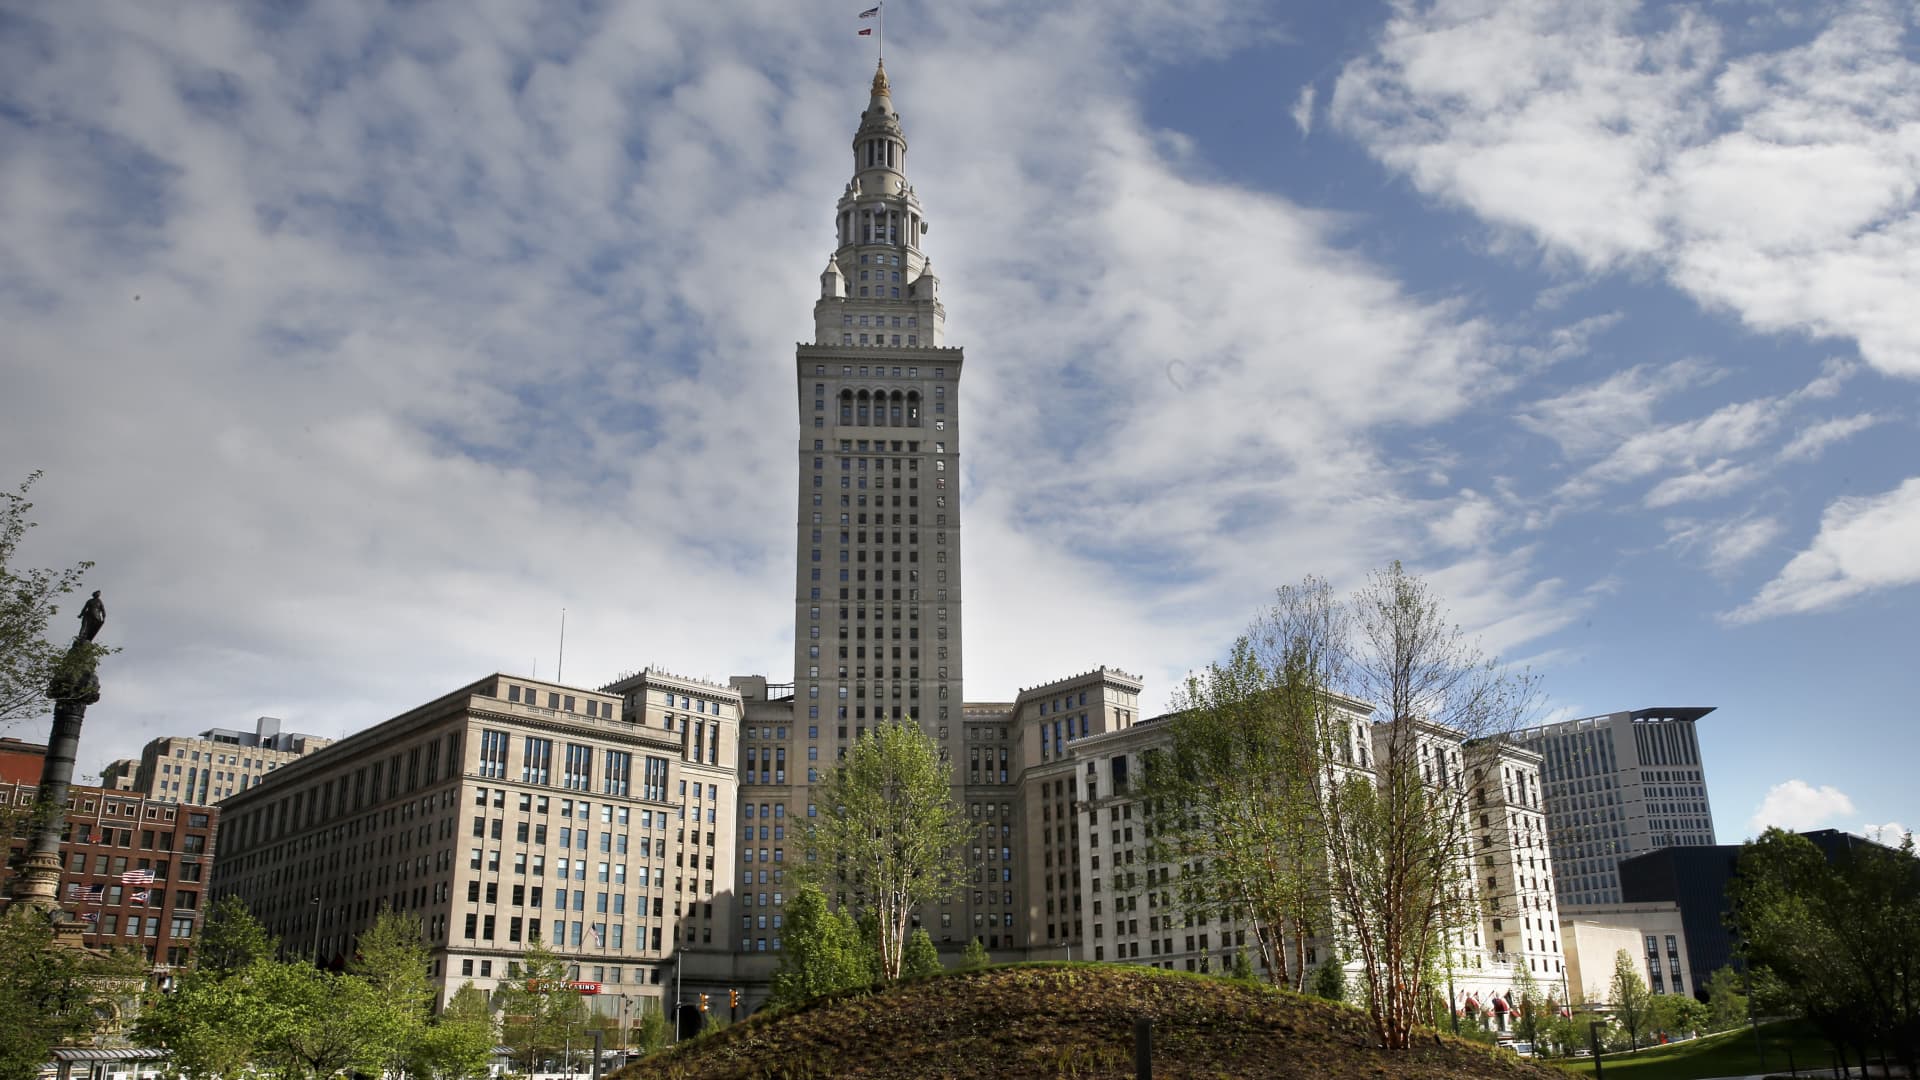 Terminal Tower rises behind Public Park in downtown in Cleveland, Ohio on Tues. June 7, 2016.